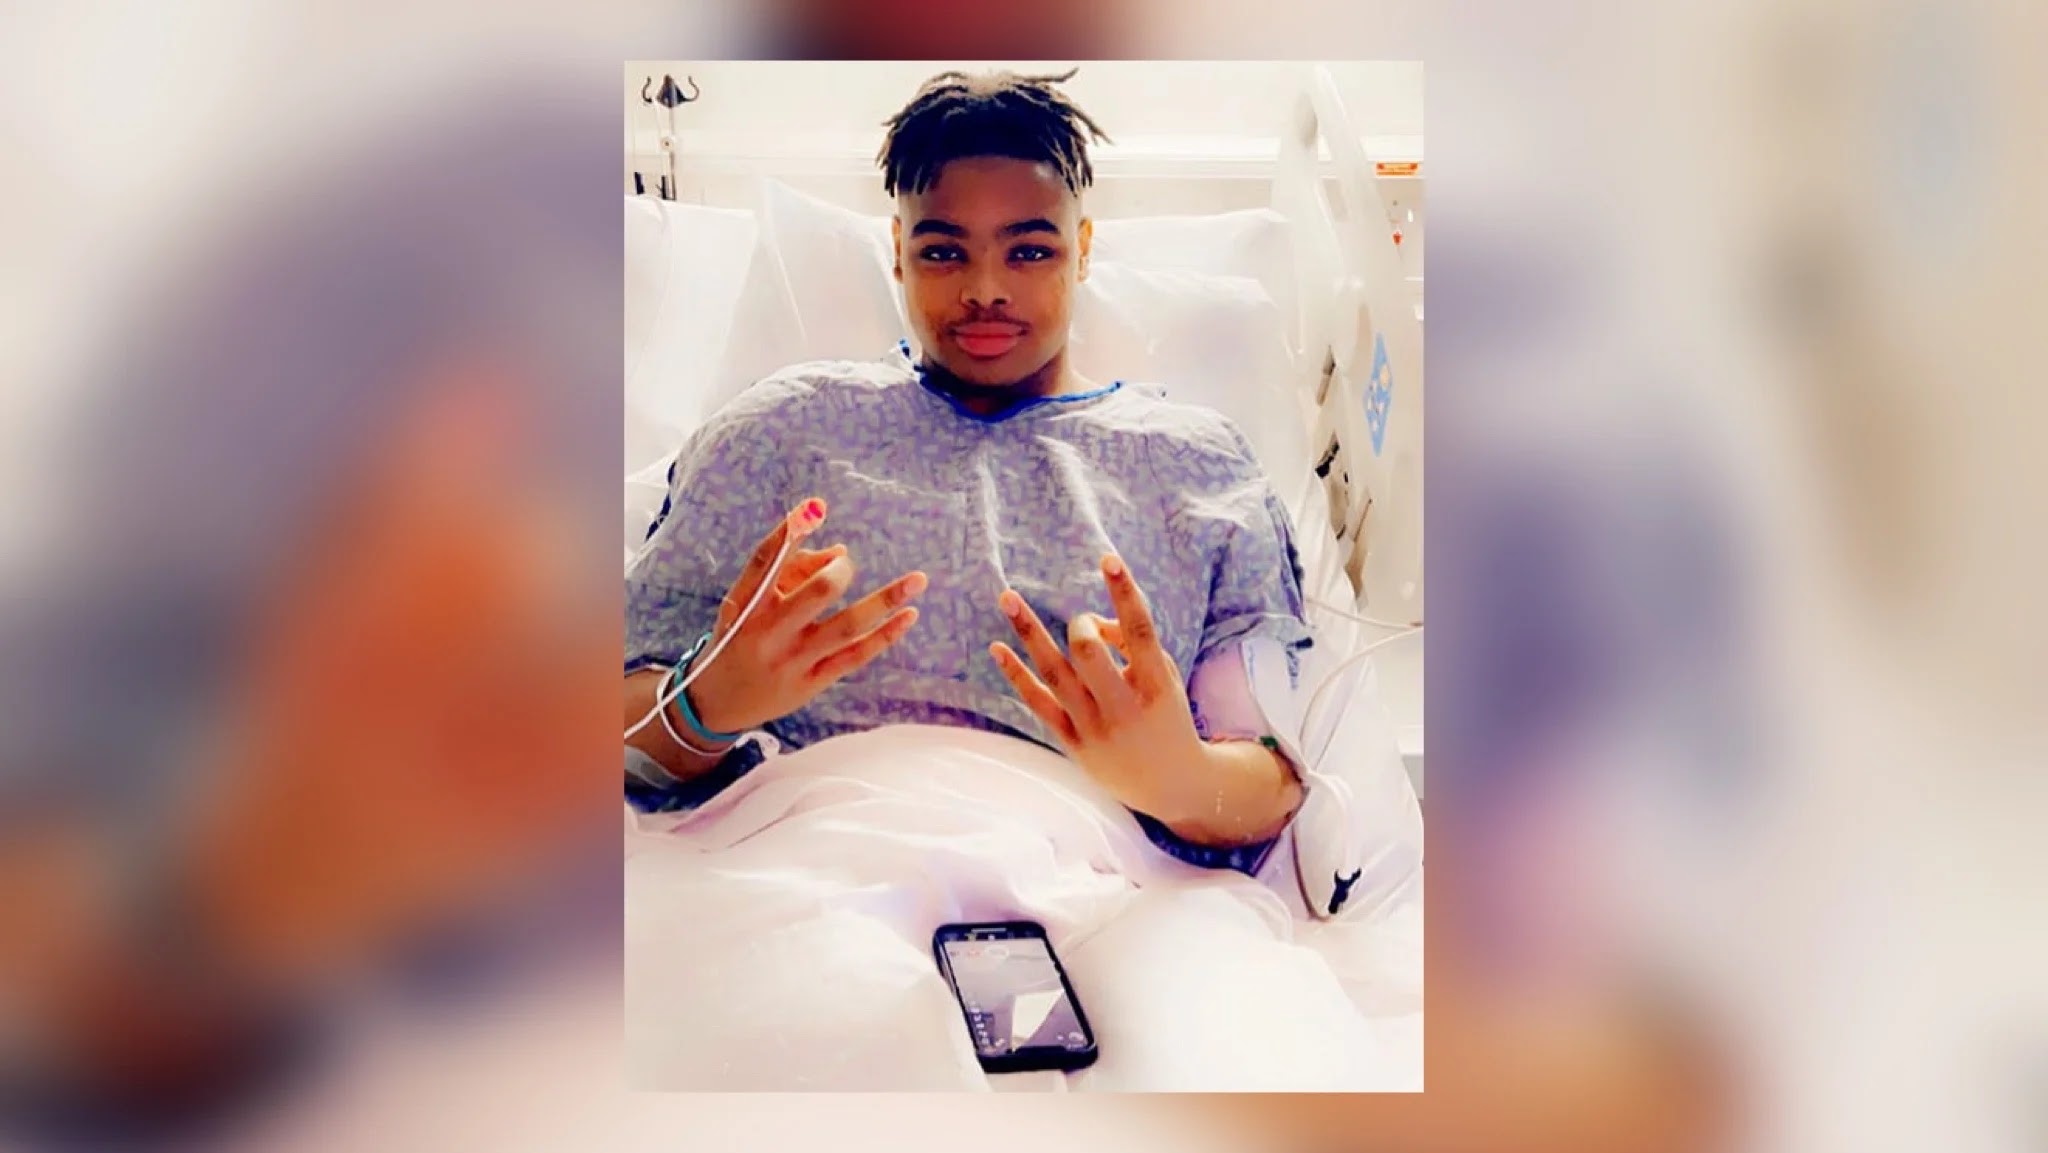 Junior Varsity Basketball Player Suffers Seizure and Cardiac Arrest During Game